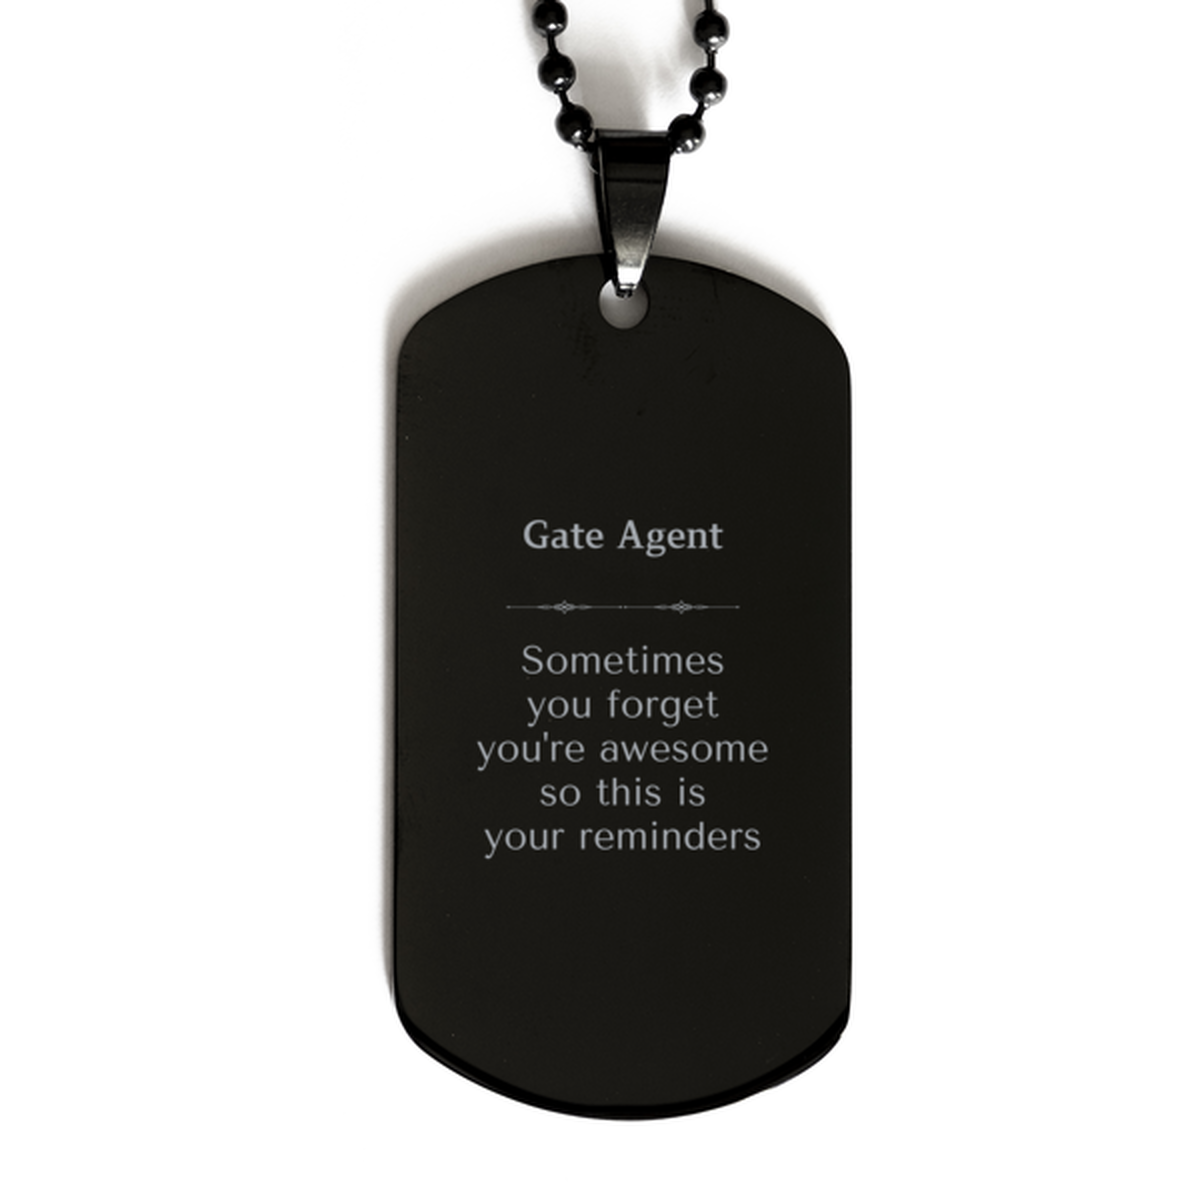 Sentimental Gate Agent Black Dog Tag, Gate Agent Sometimes you forget you're awesome so this is your reminders, Graduation Christmas Birthday Gifts for Gate Agent, Men, Women, Coworkers